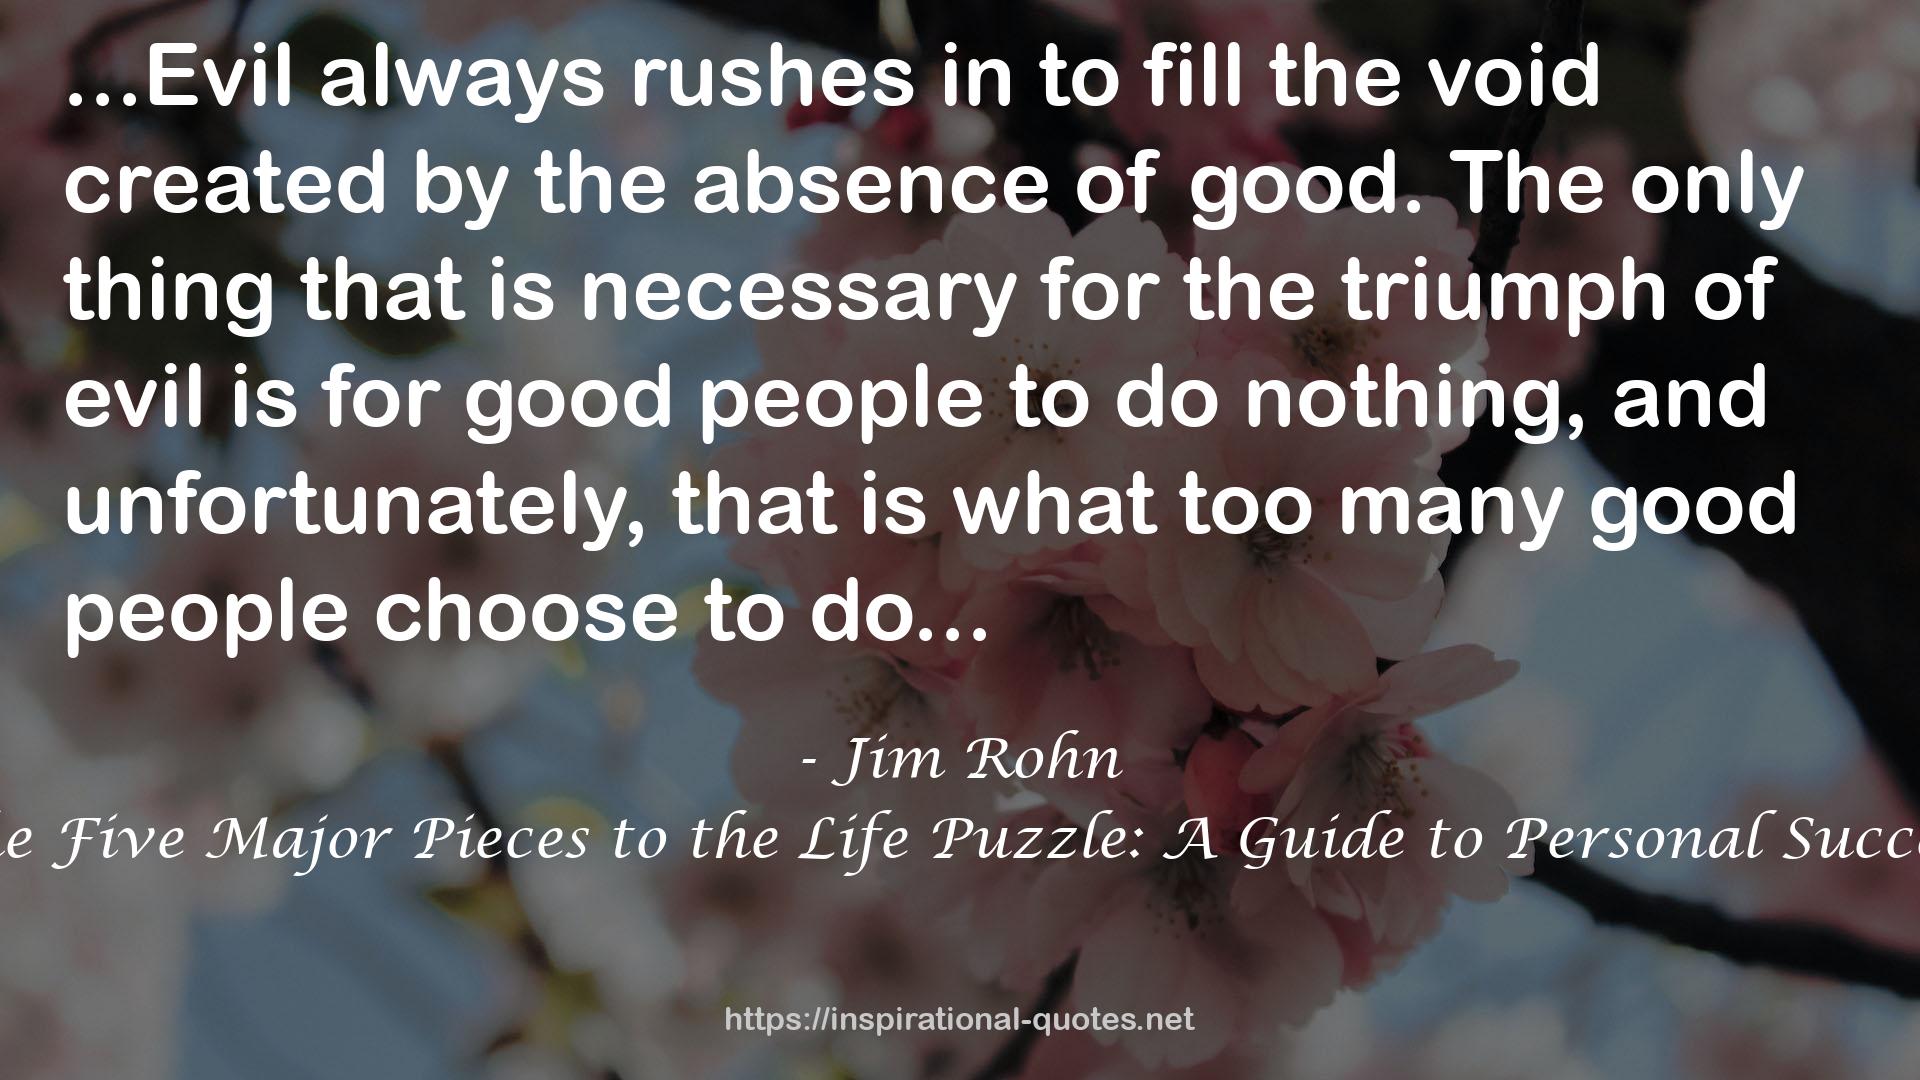 The Five Major Pieces to the Life Puzzle: A Guide to Personal Success QUOTES